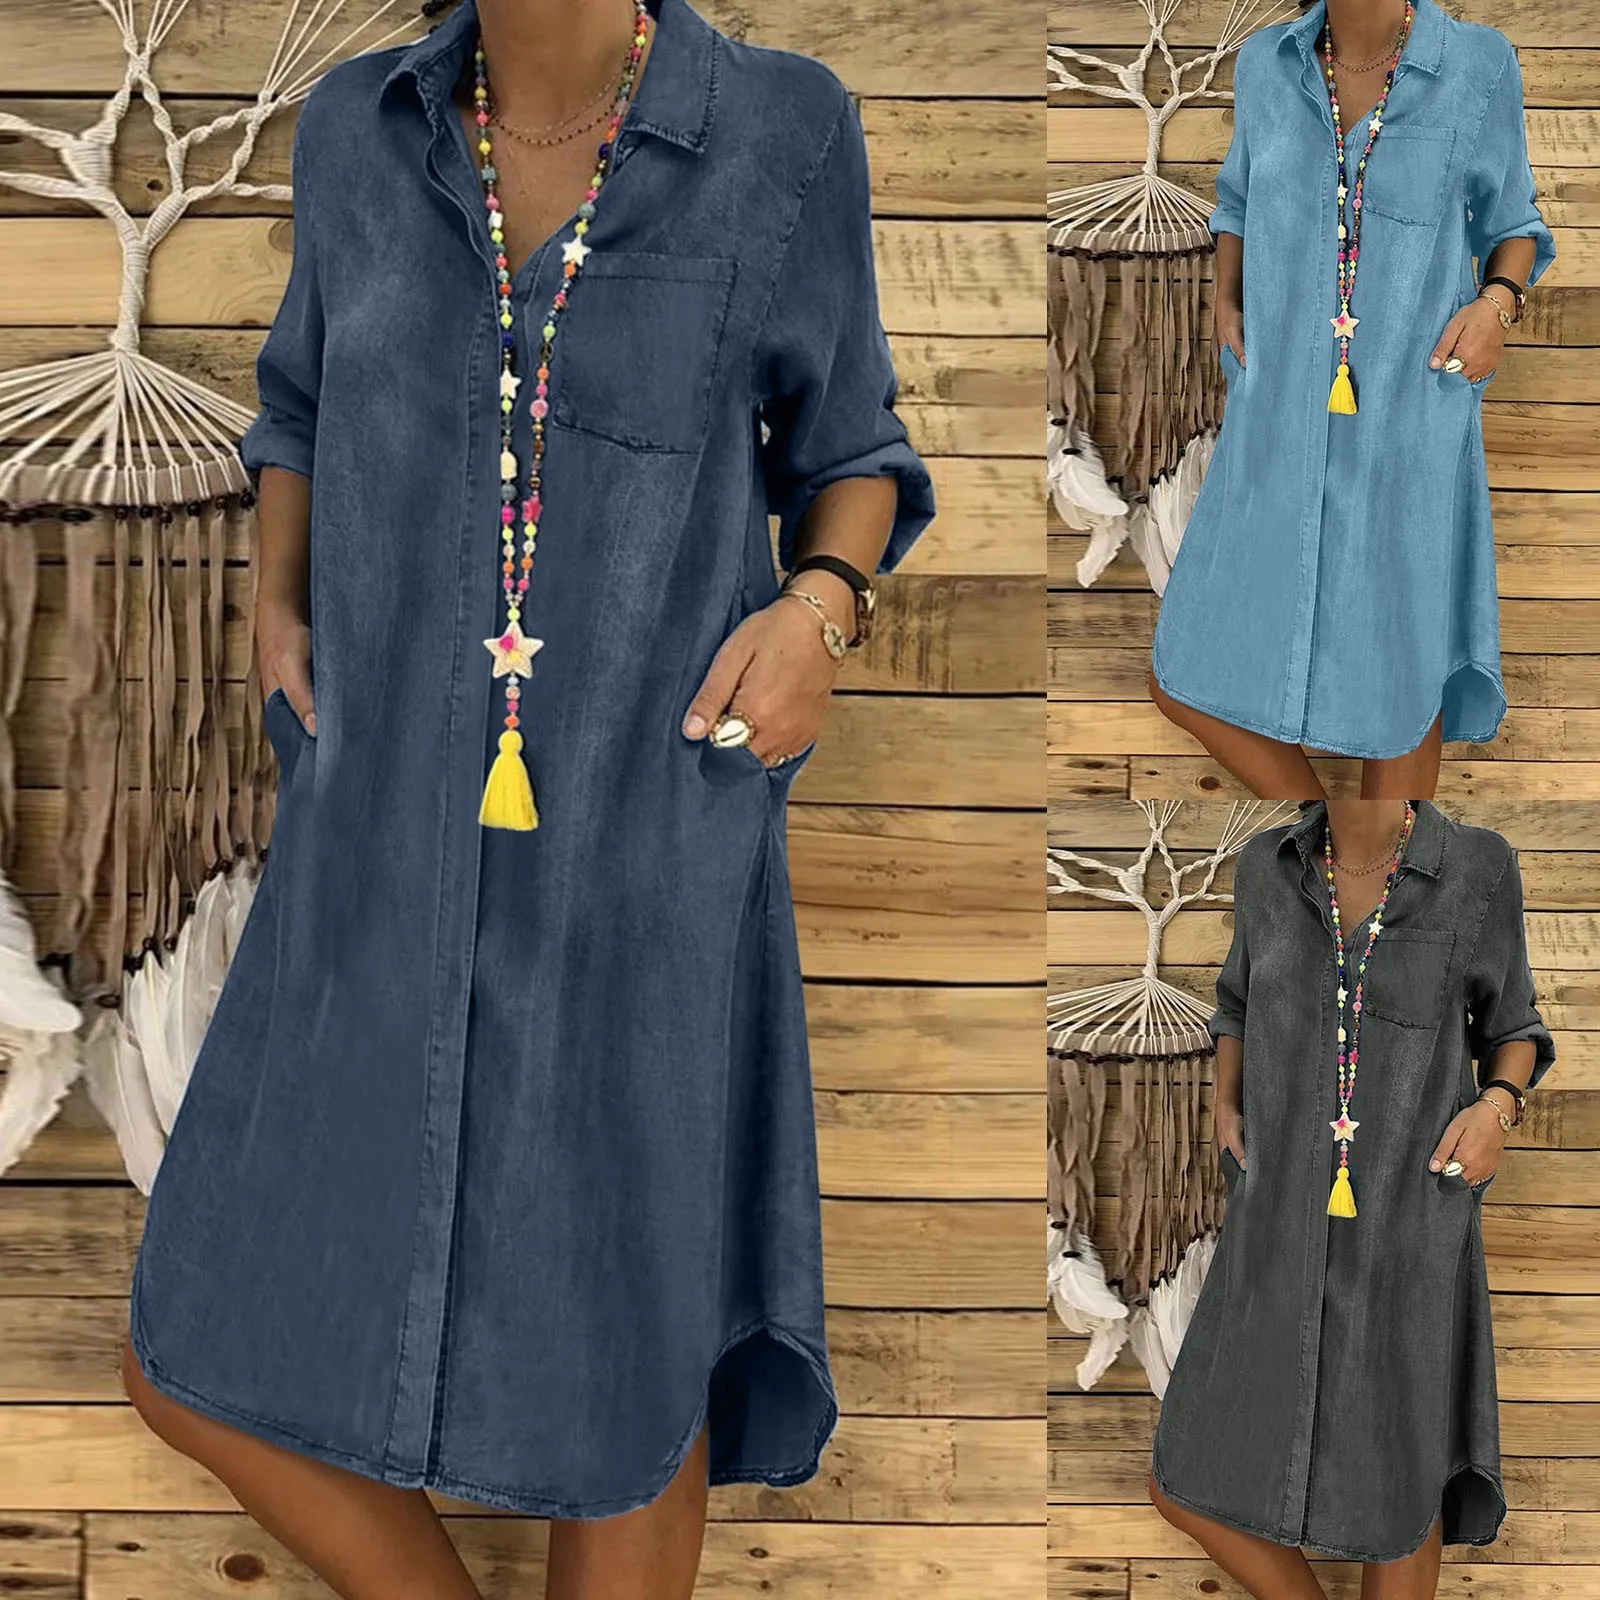 Women Lace Trim Denim Shirt Dresses Half Sleeve Distressed Jean Dress  Button Down Casual Side Slit Tunic Tops Blue at Amazon Women's Clothing  store